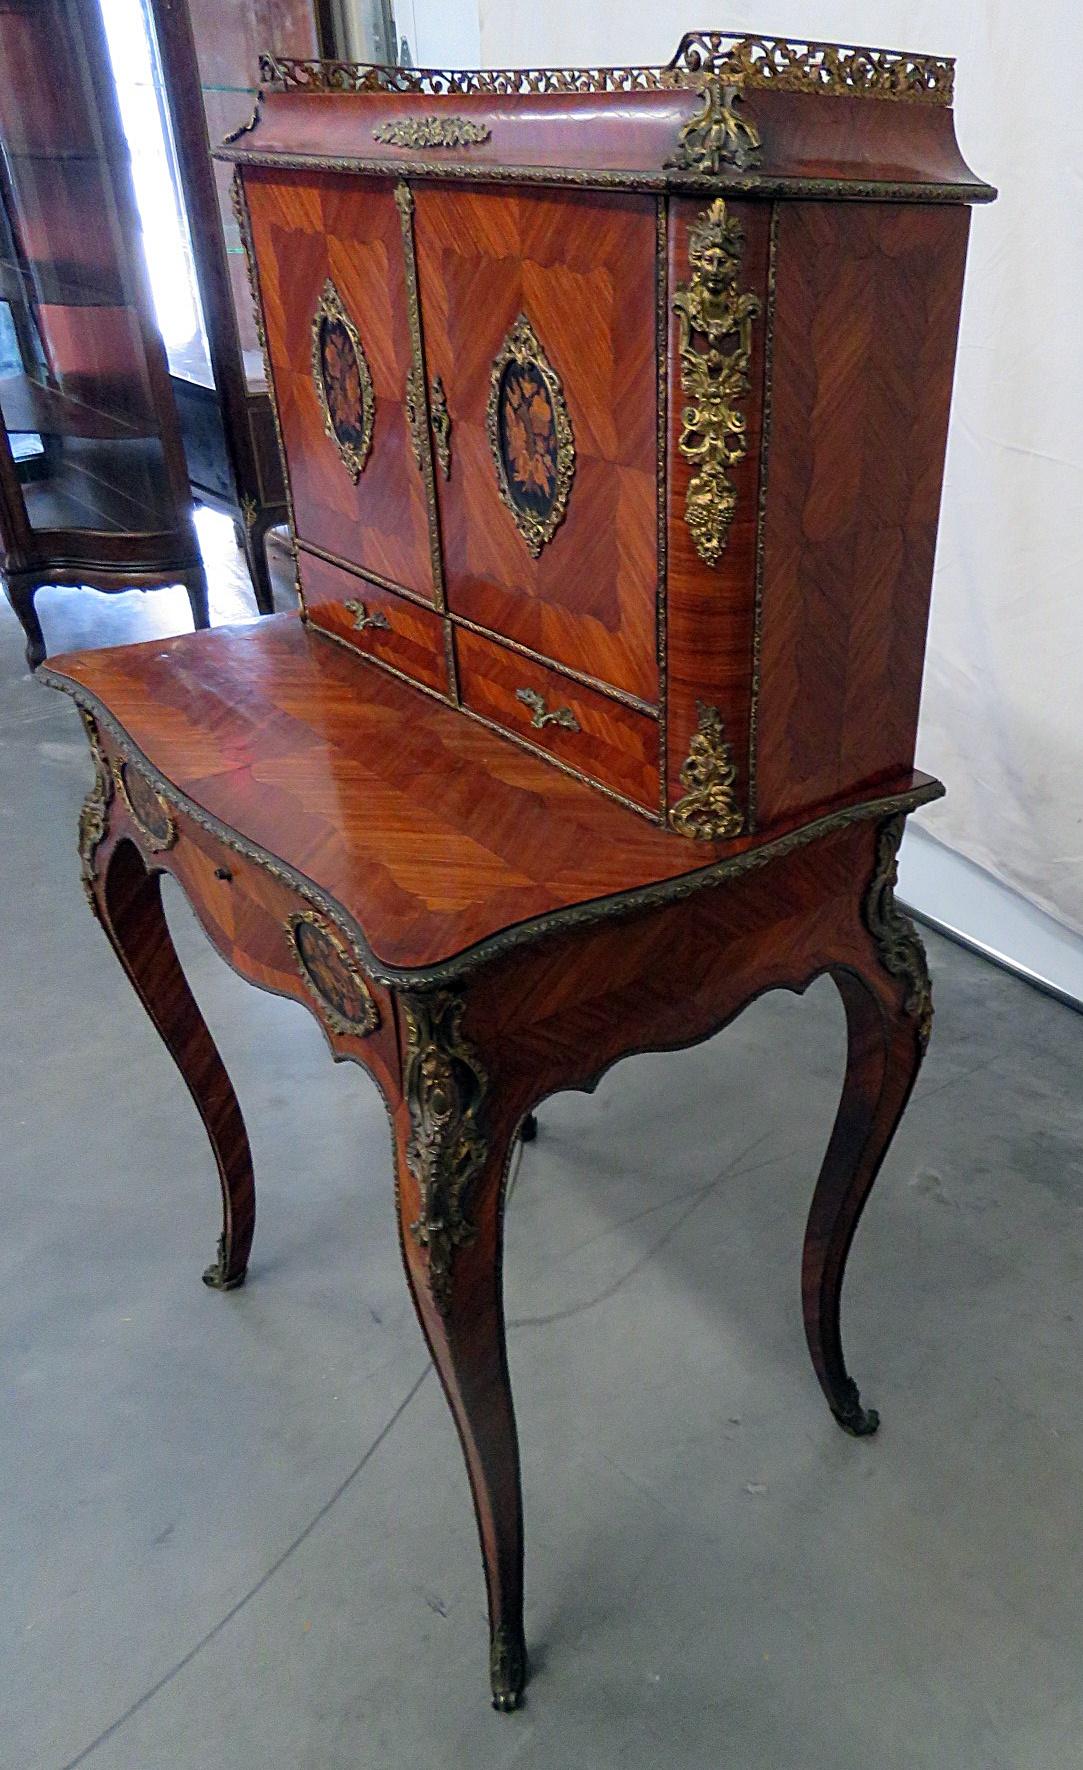 Antique C1870s French Louis XVI Style Inlaid King Wood Ladies Writing Desk For Sale 6